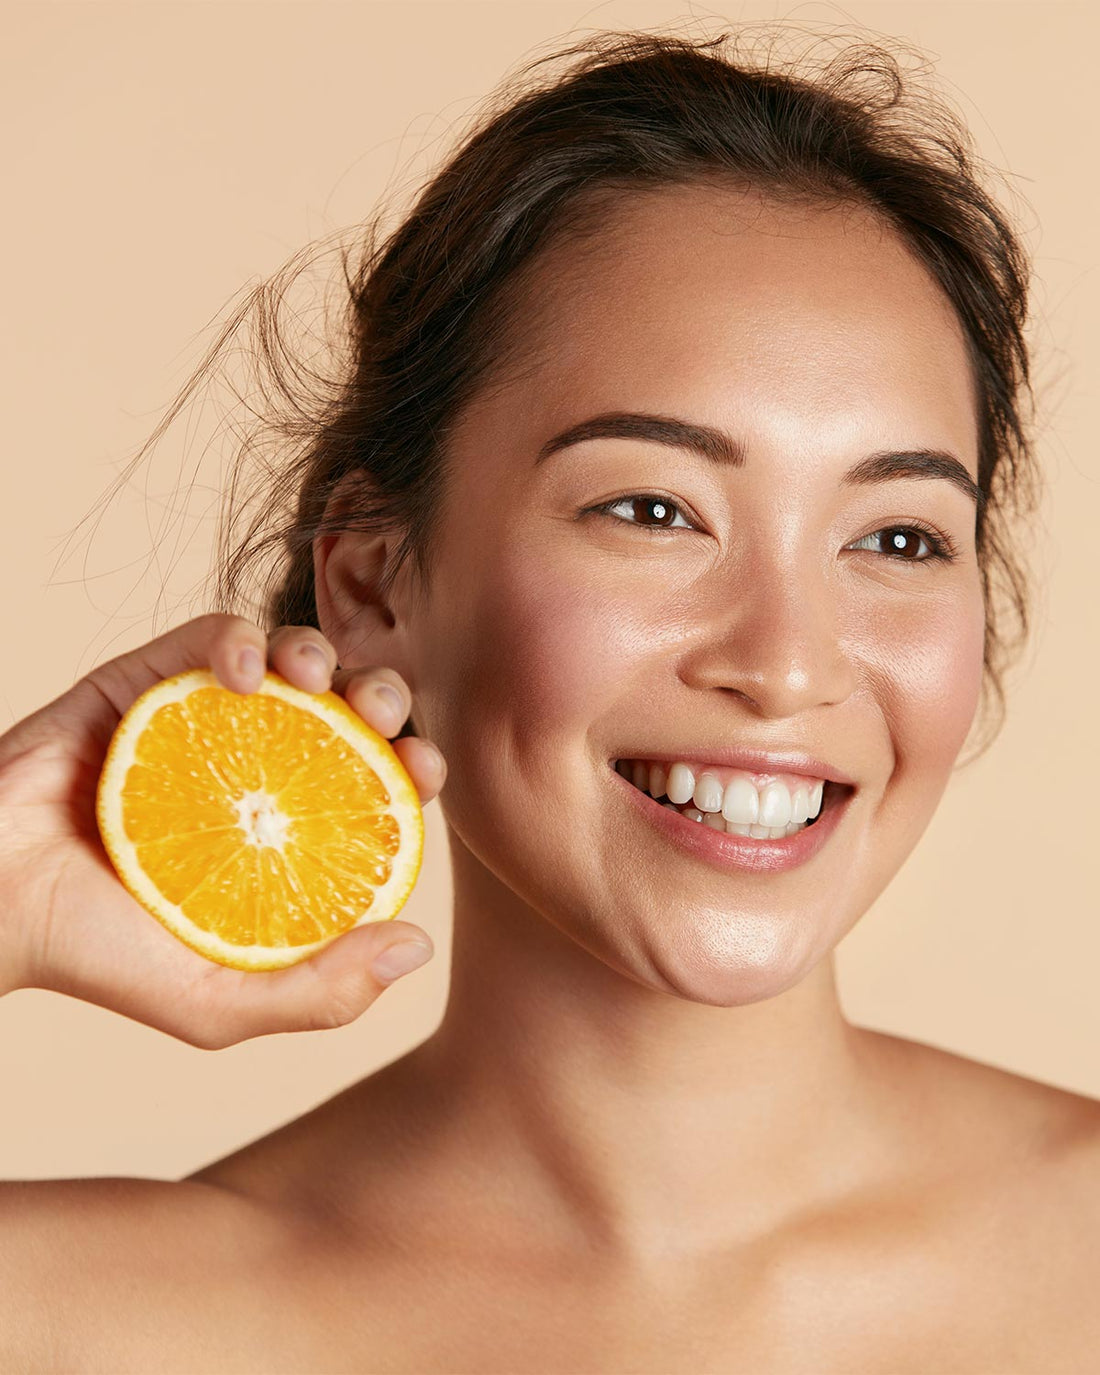 Beyond the Hype: Understanding the Limitations of Natural Skin Care